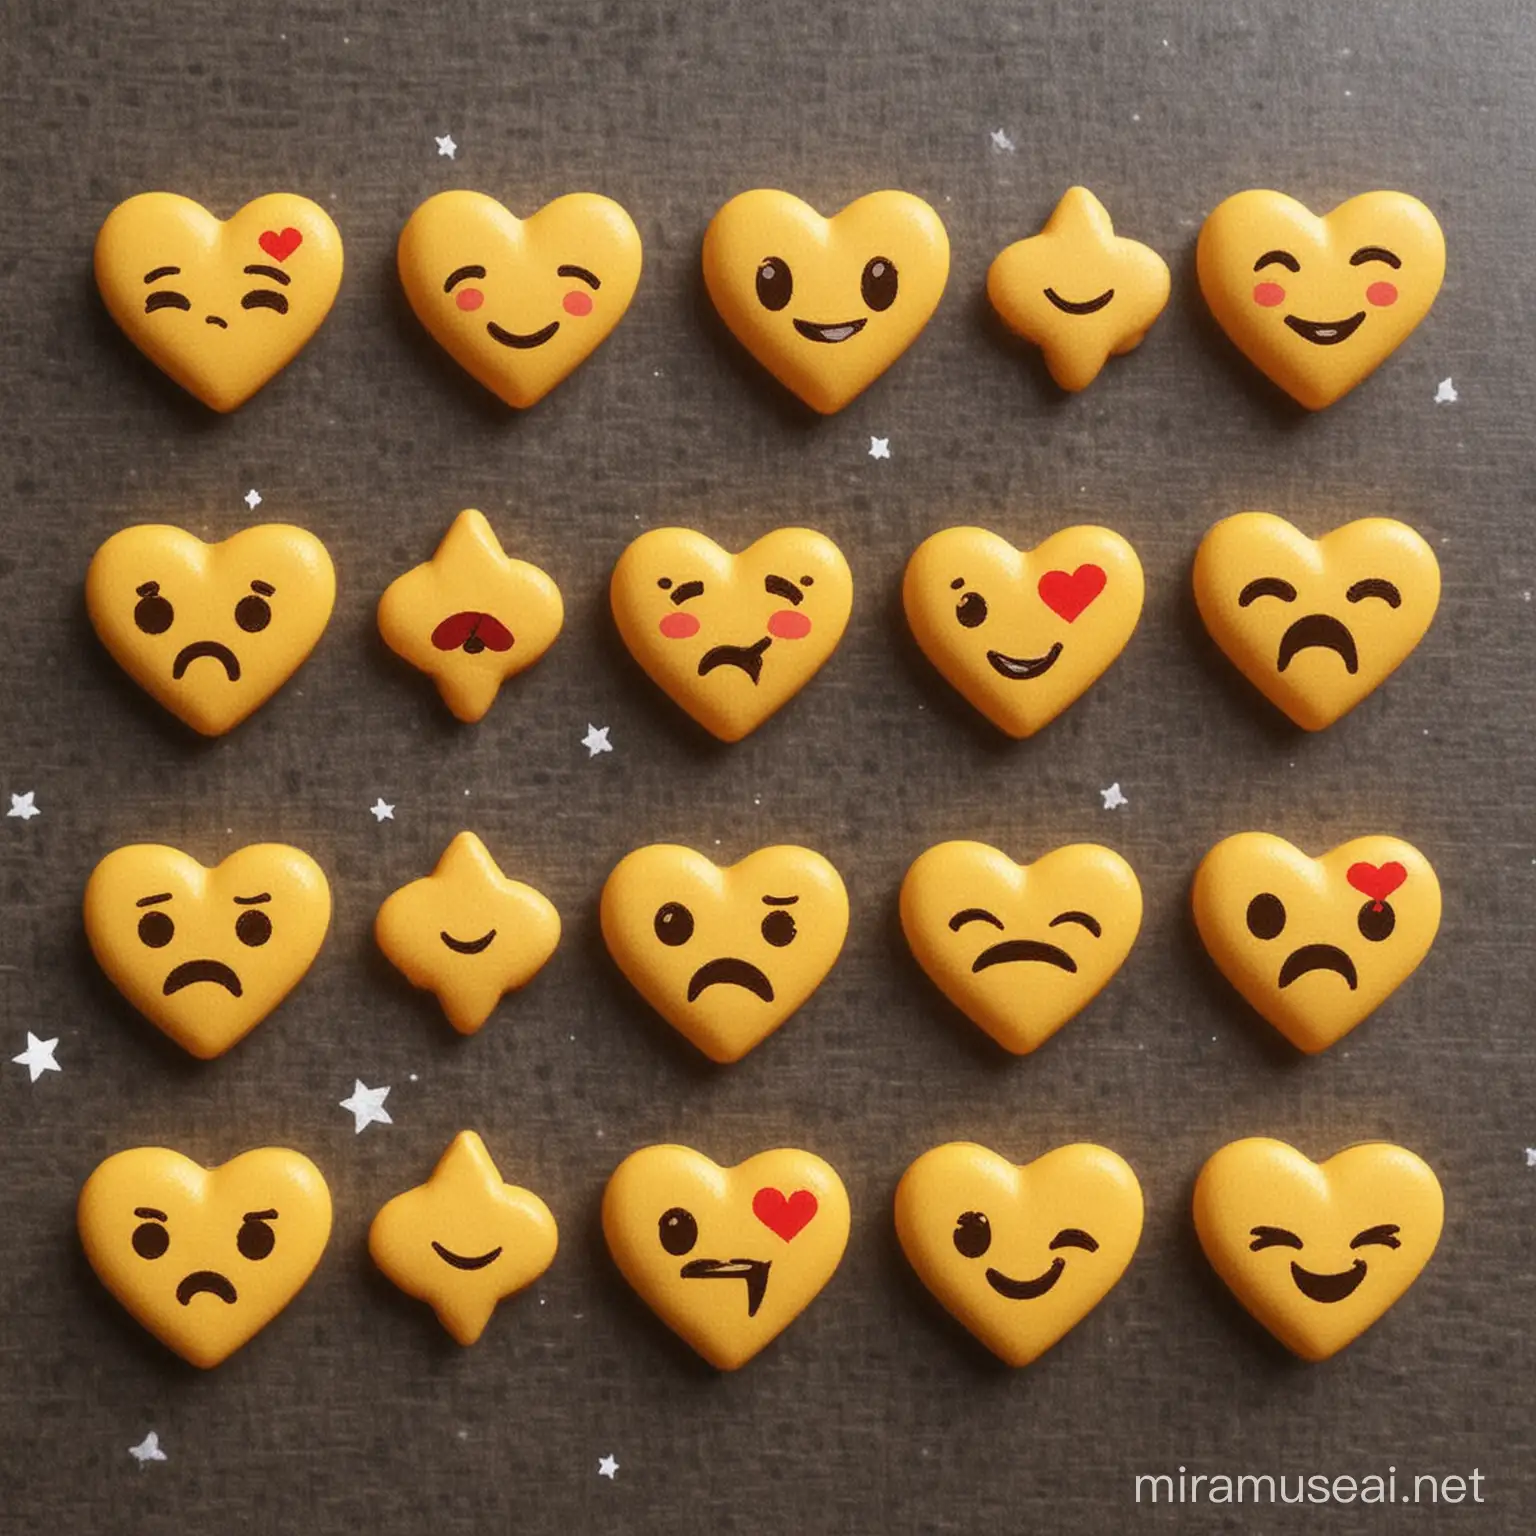 Continuous Star and Heart Emoji Pattern for Photo Backgrounds